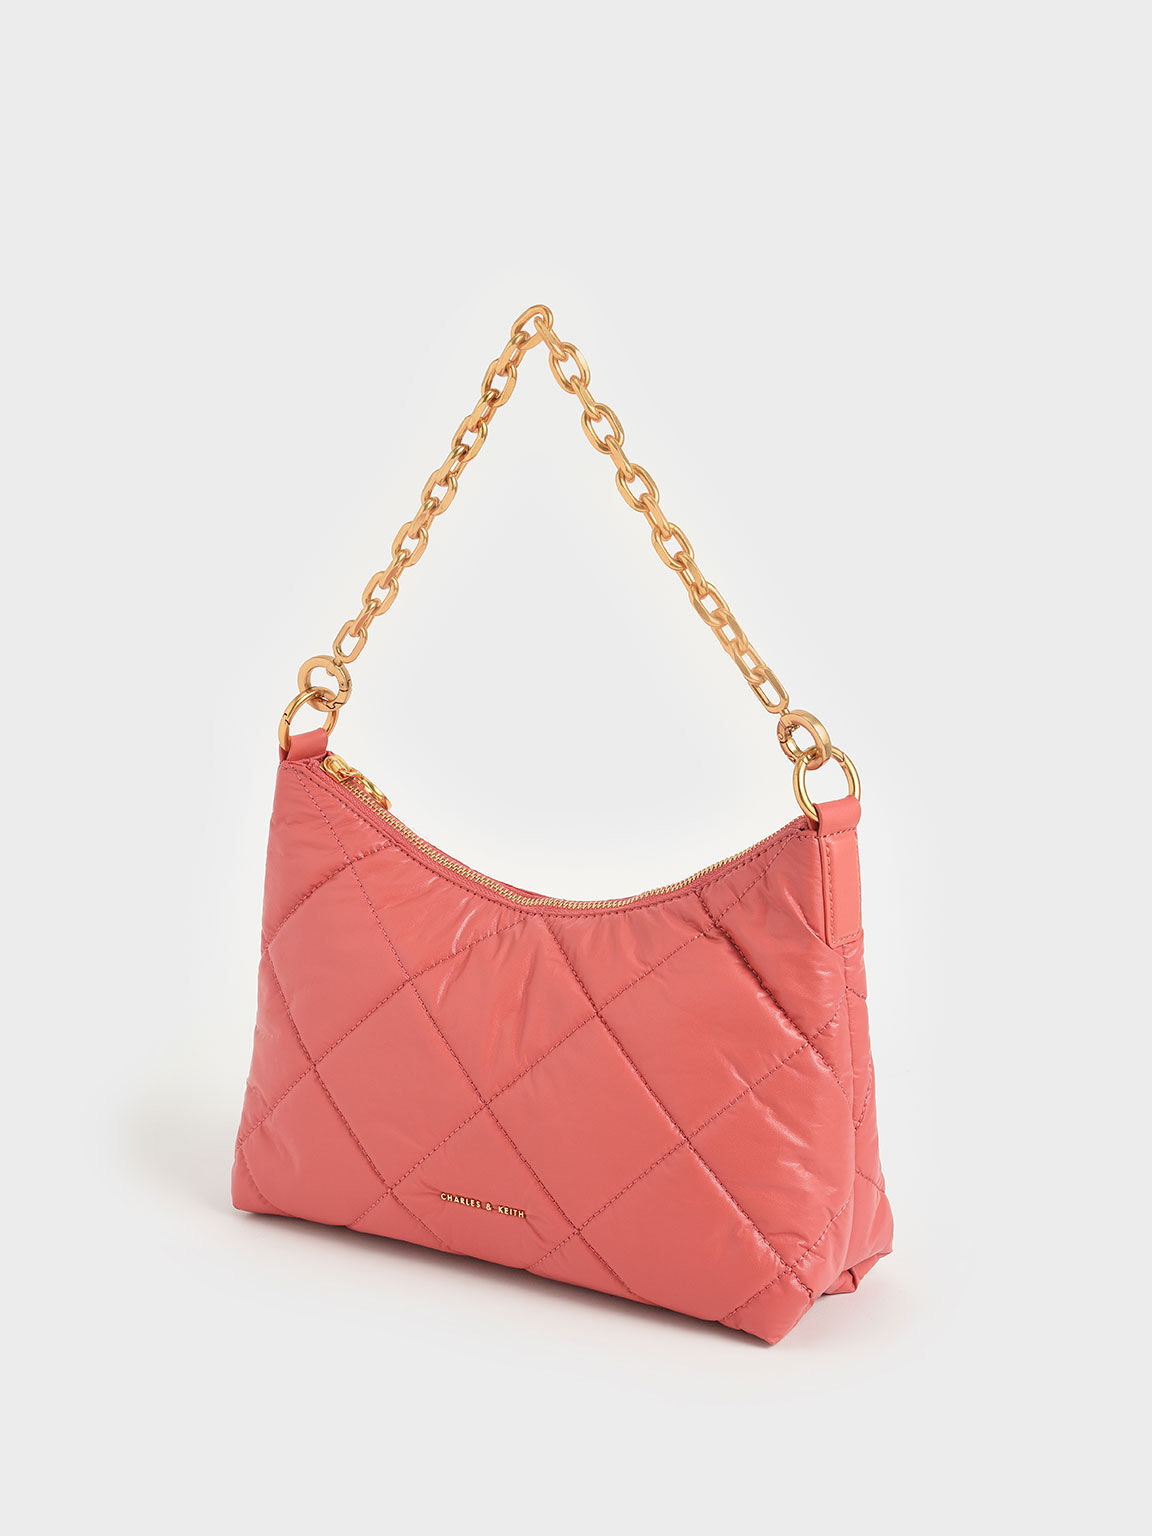 Paffuto Quilted Chain Handle Bag, Coral, hi-res